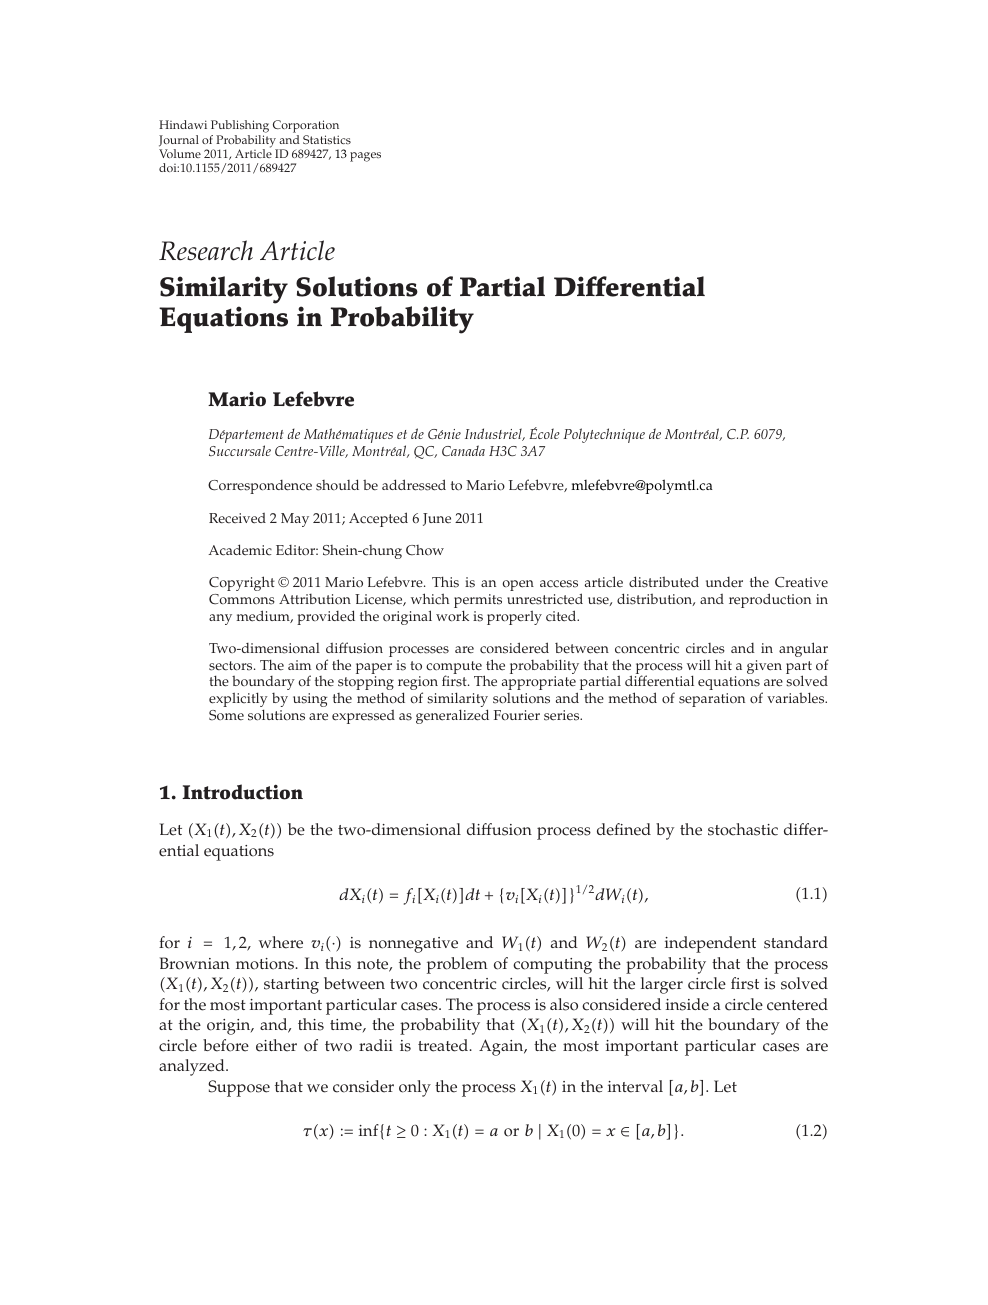 Similarity Solutions Of Partial Differential Equations In Probability Topic Of Research Paper In Mathematics Download Scholarly Article Pdf And Read For Free On Cyberleninka Open Science Hub